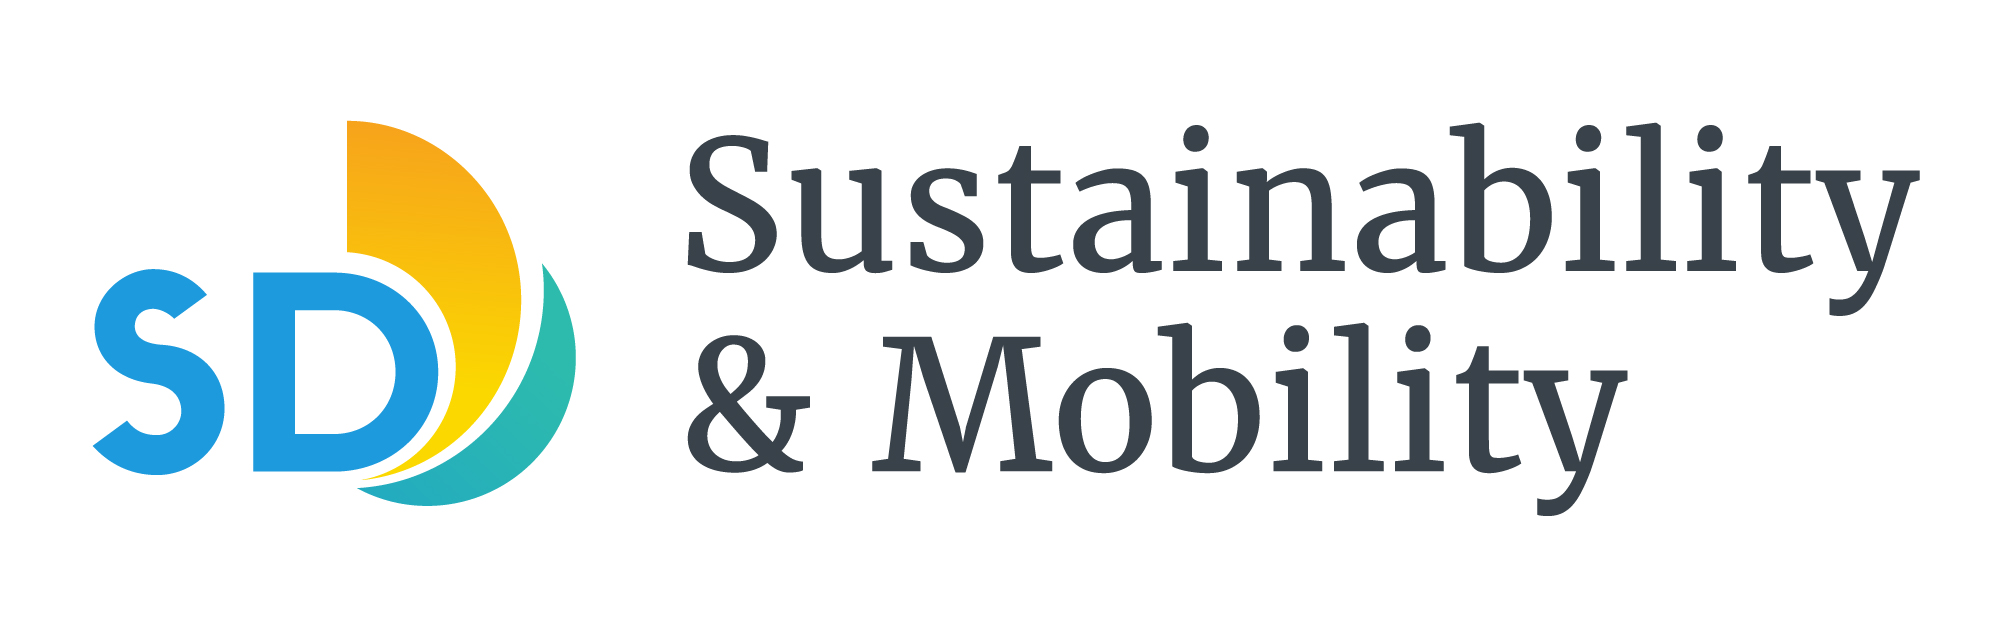 Sustainability and Mobility logo